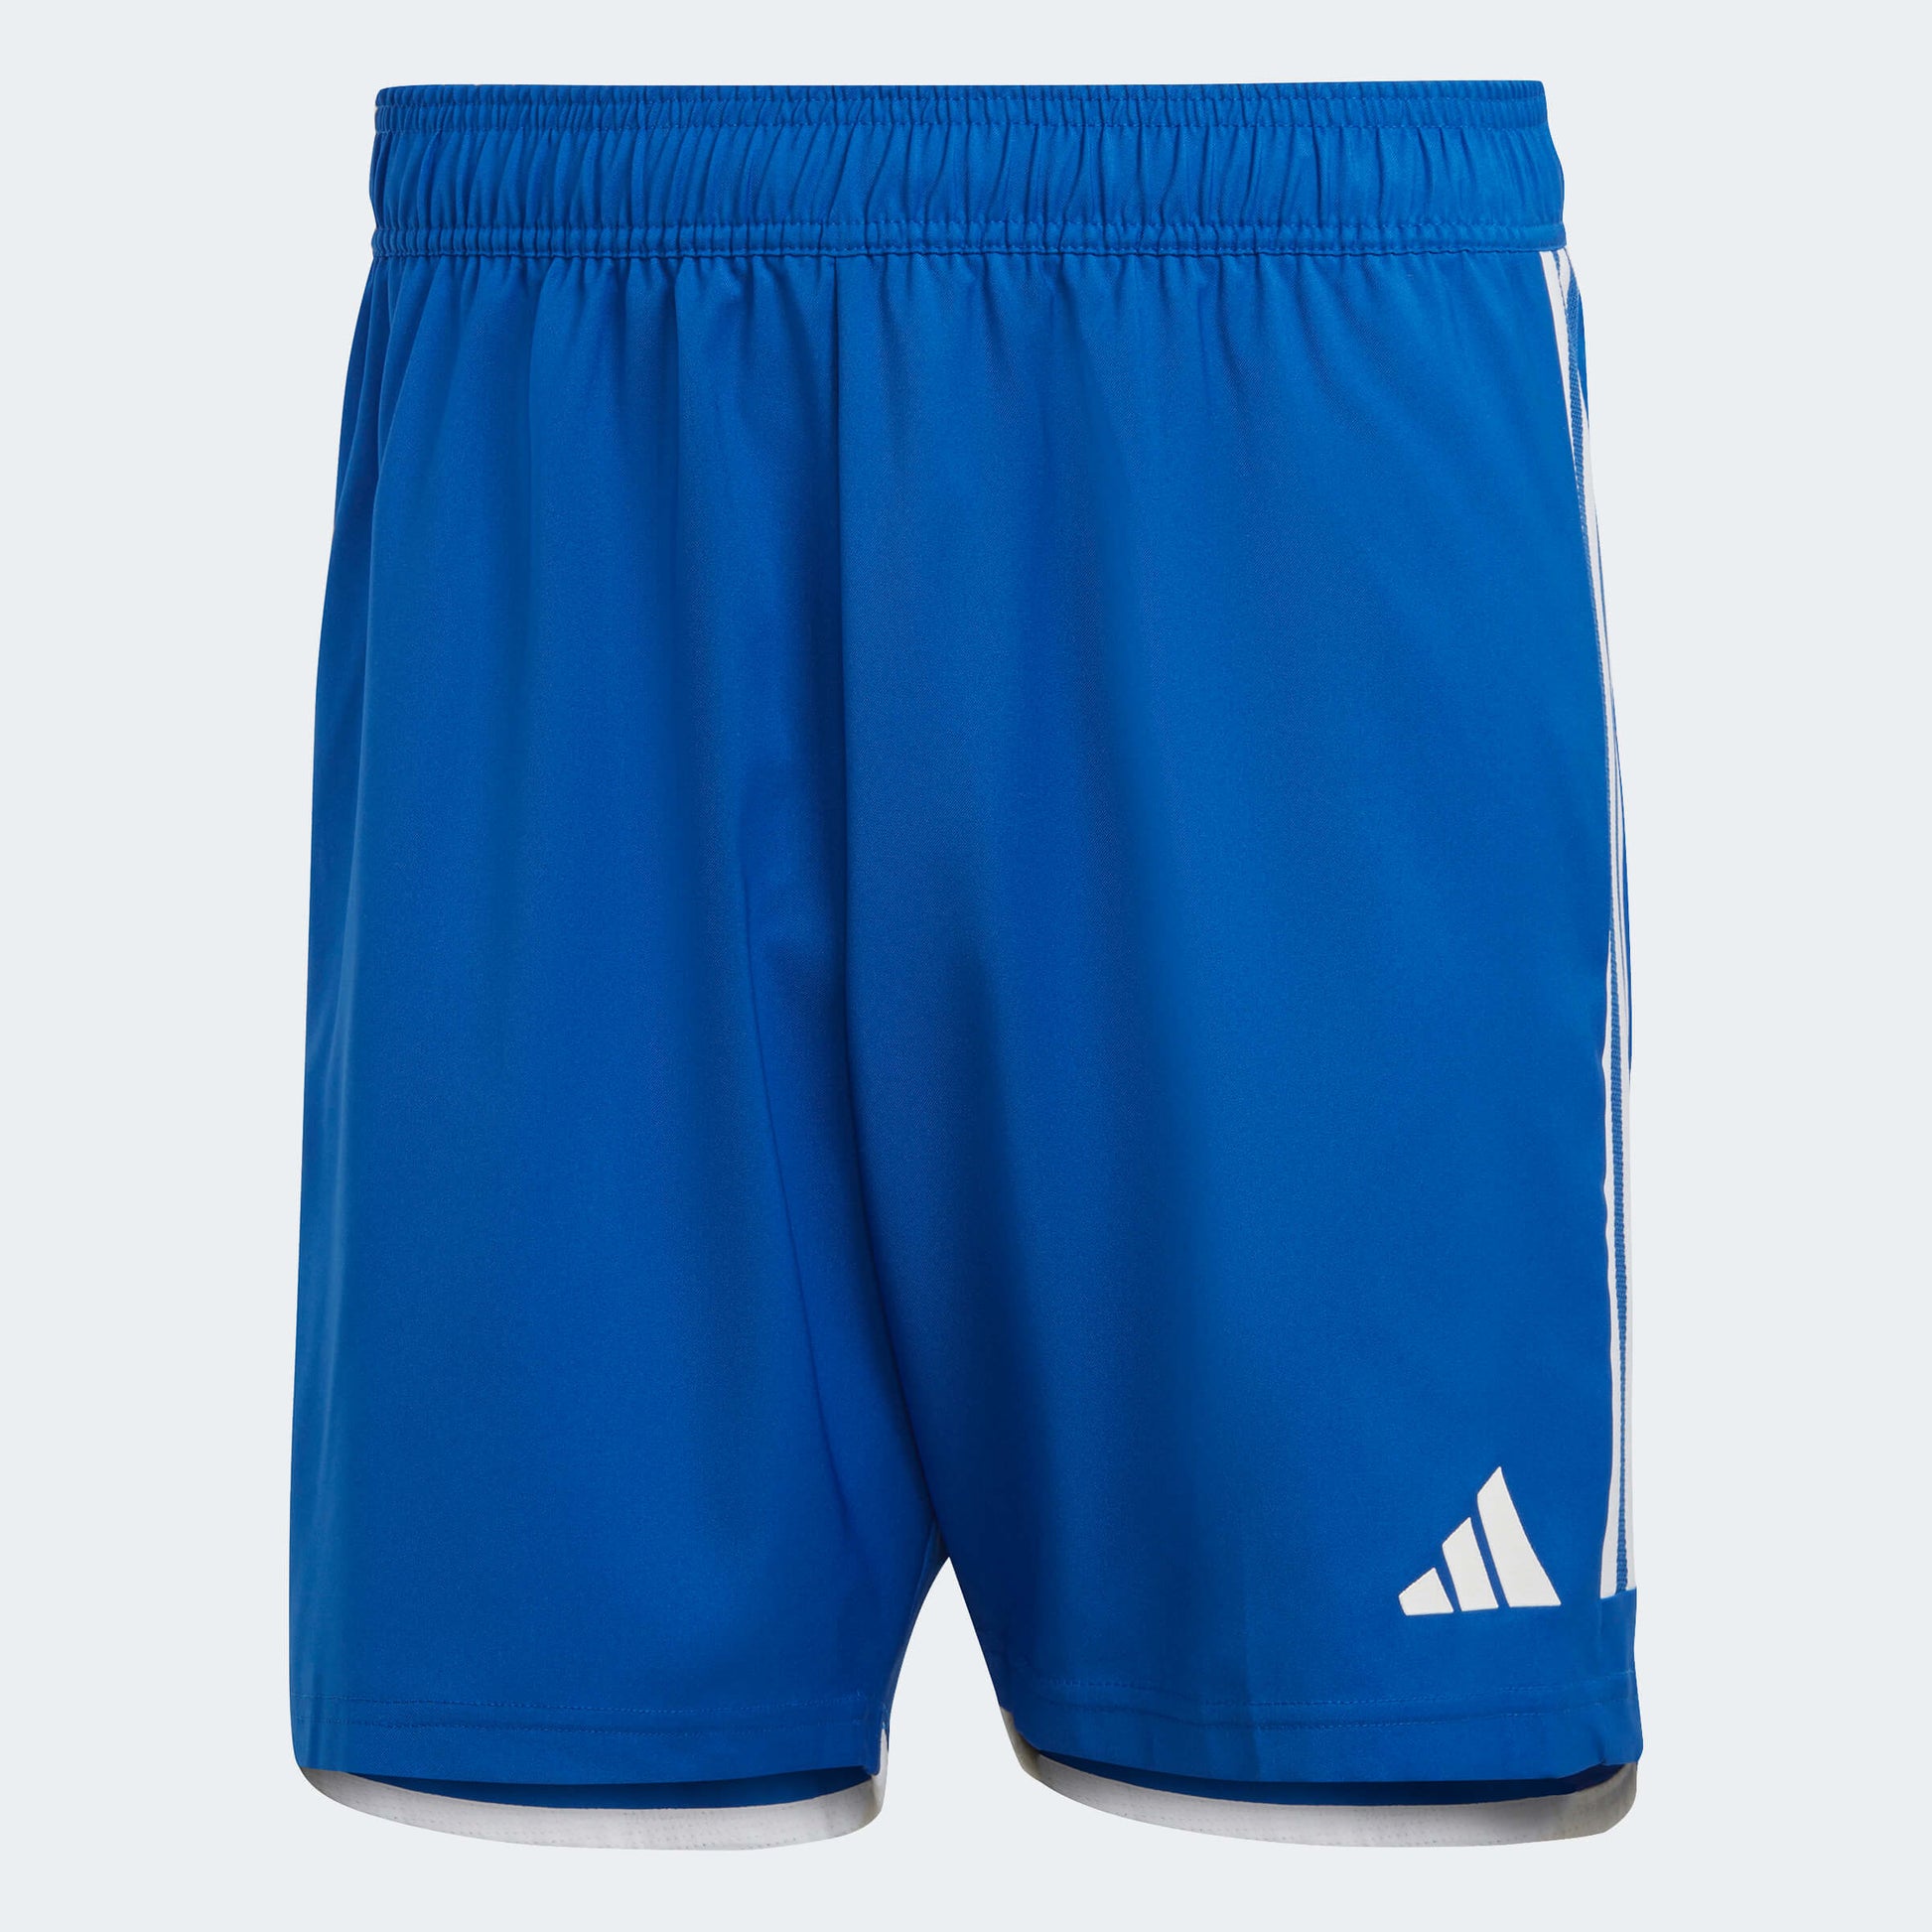 adidas Tiro 23 Competition Match Short Team Royal Blue-White (Front)